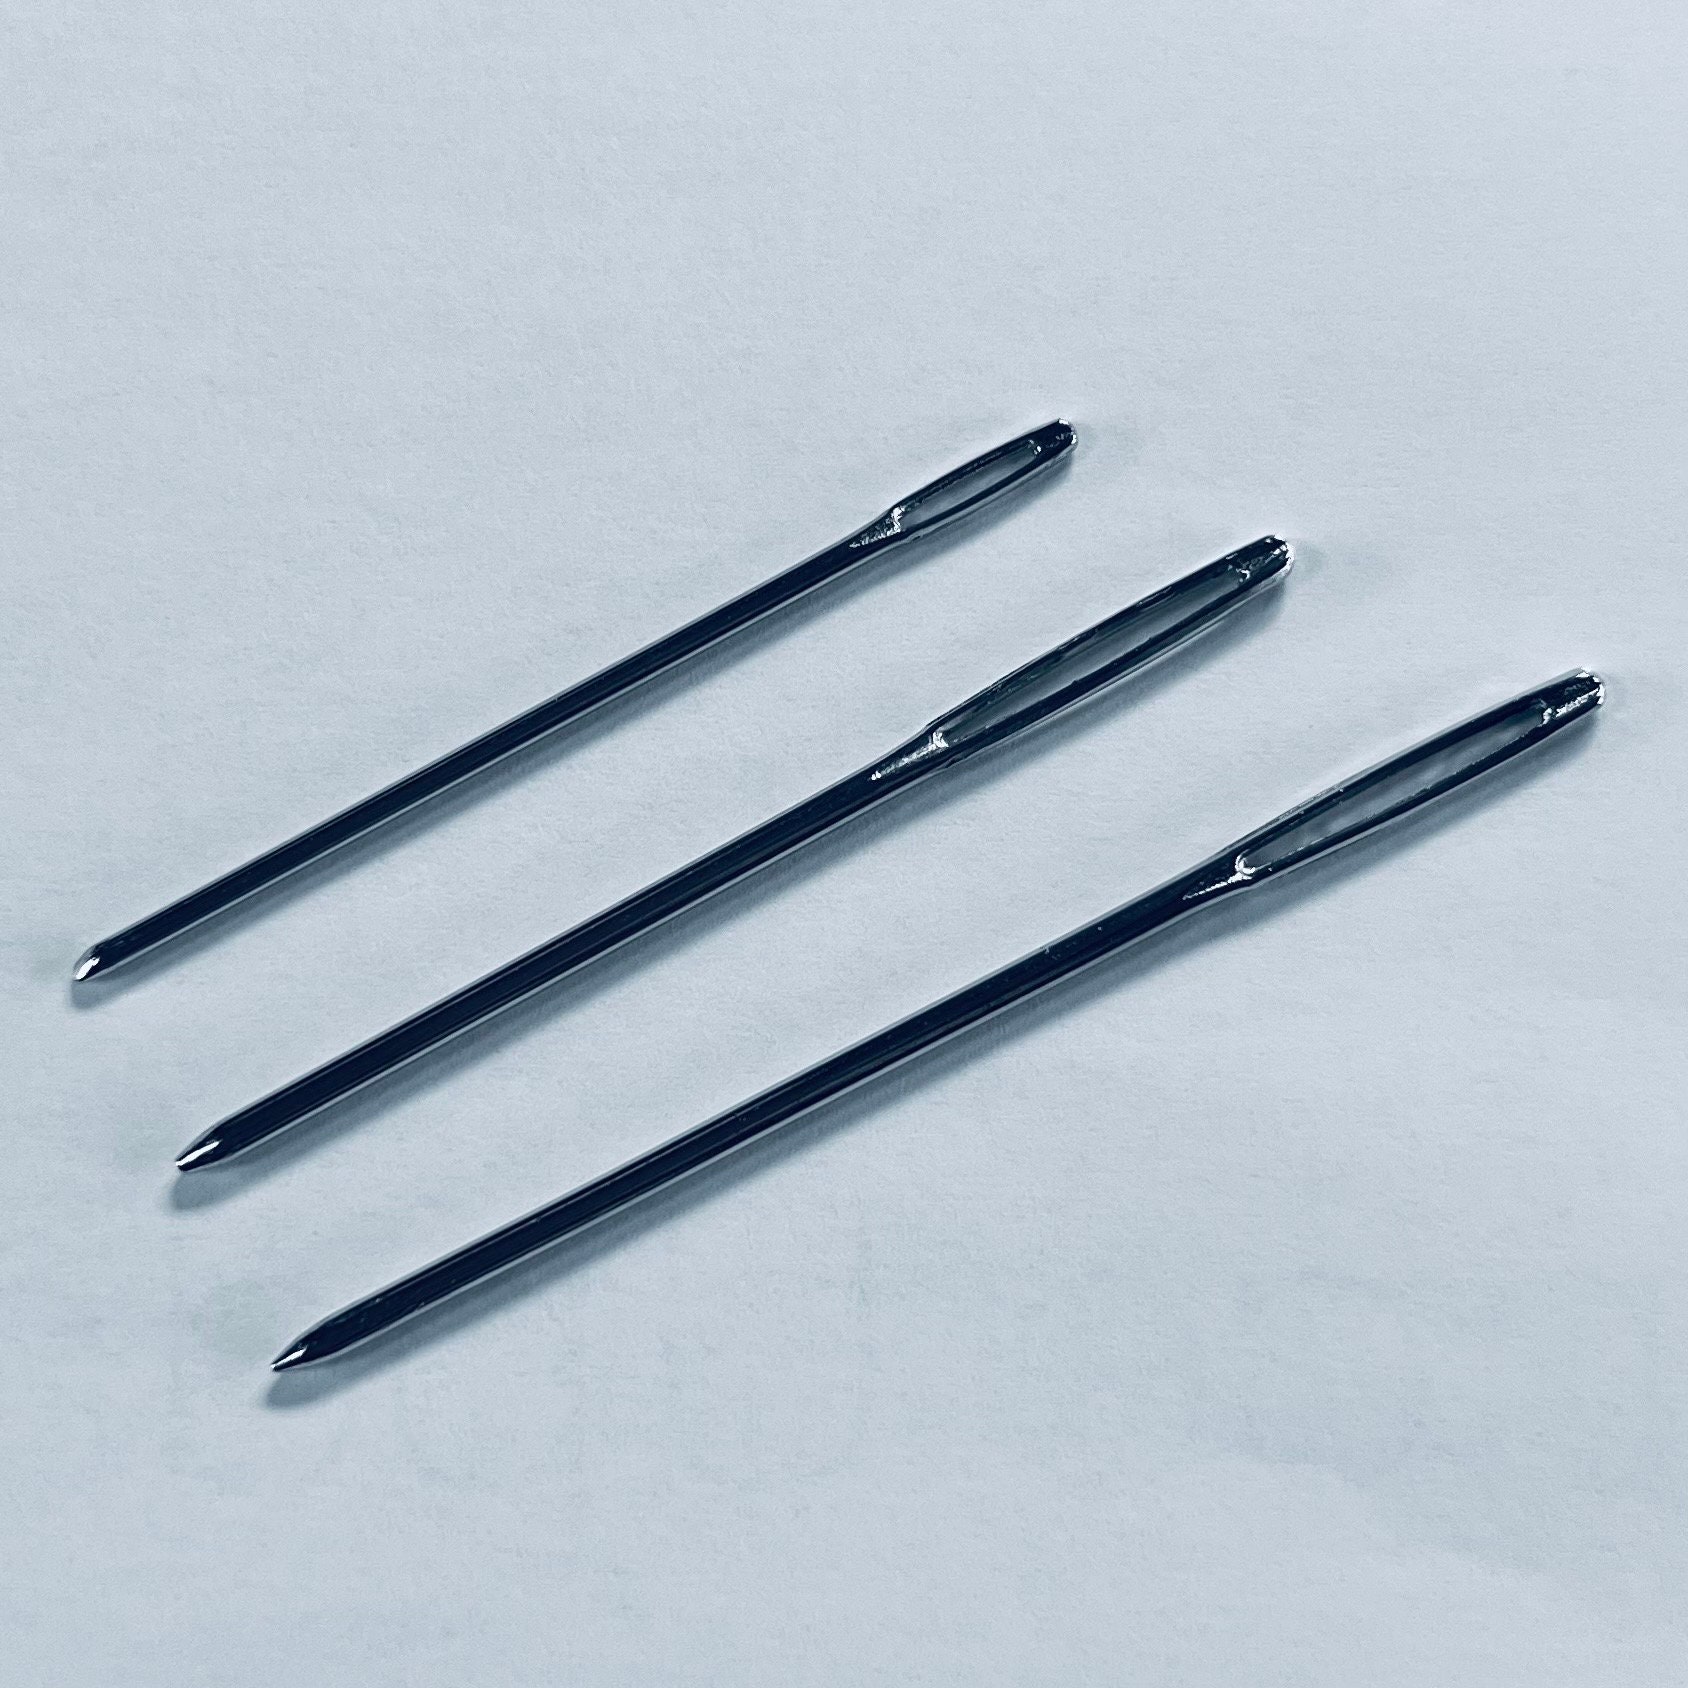 Tapestry Darning Needles, Large Eye Aluminium Sewing Needle for Knitting,  Wool, Tapestry, Yarn or Cross Stitch 